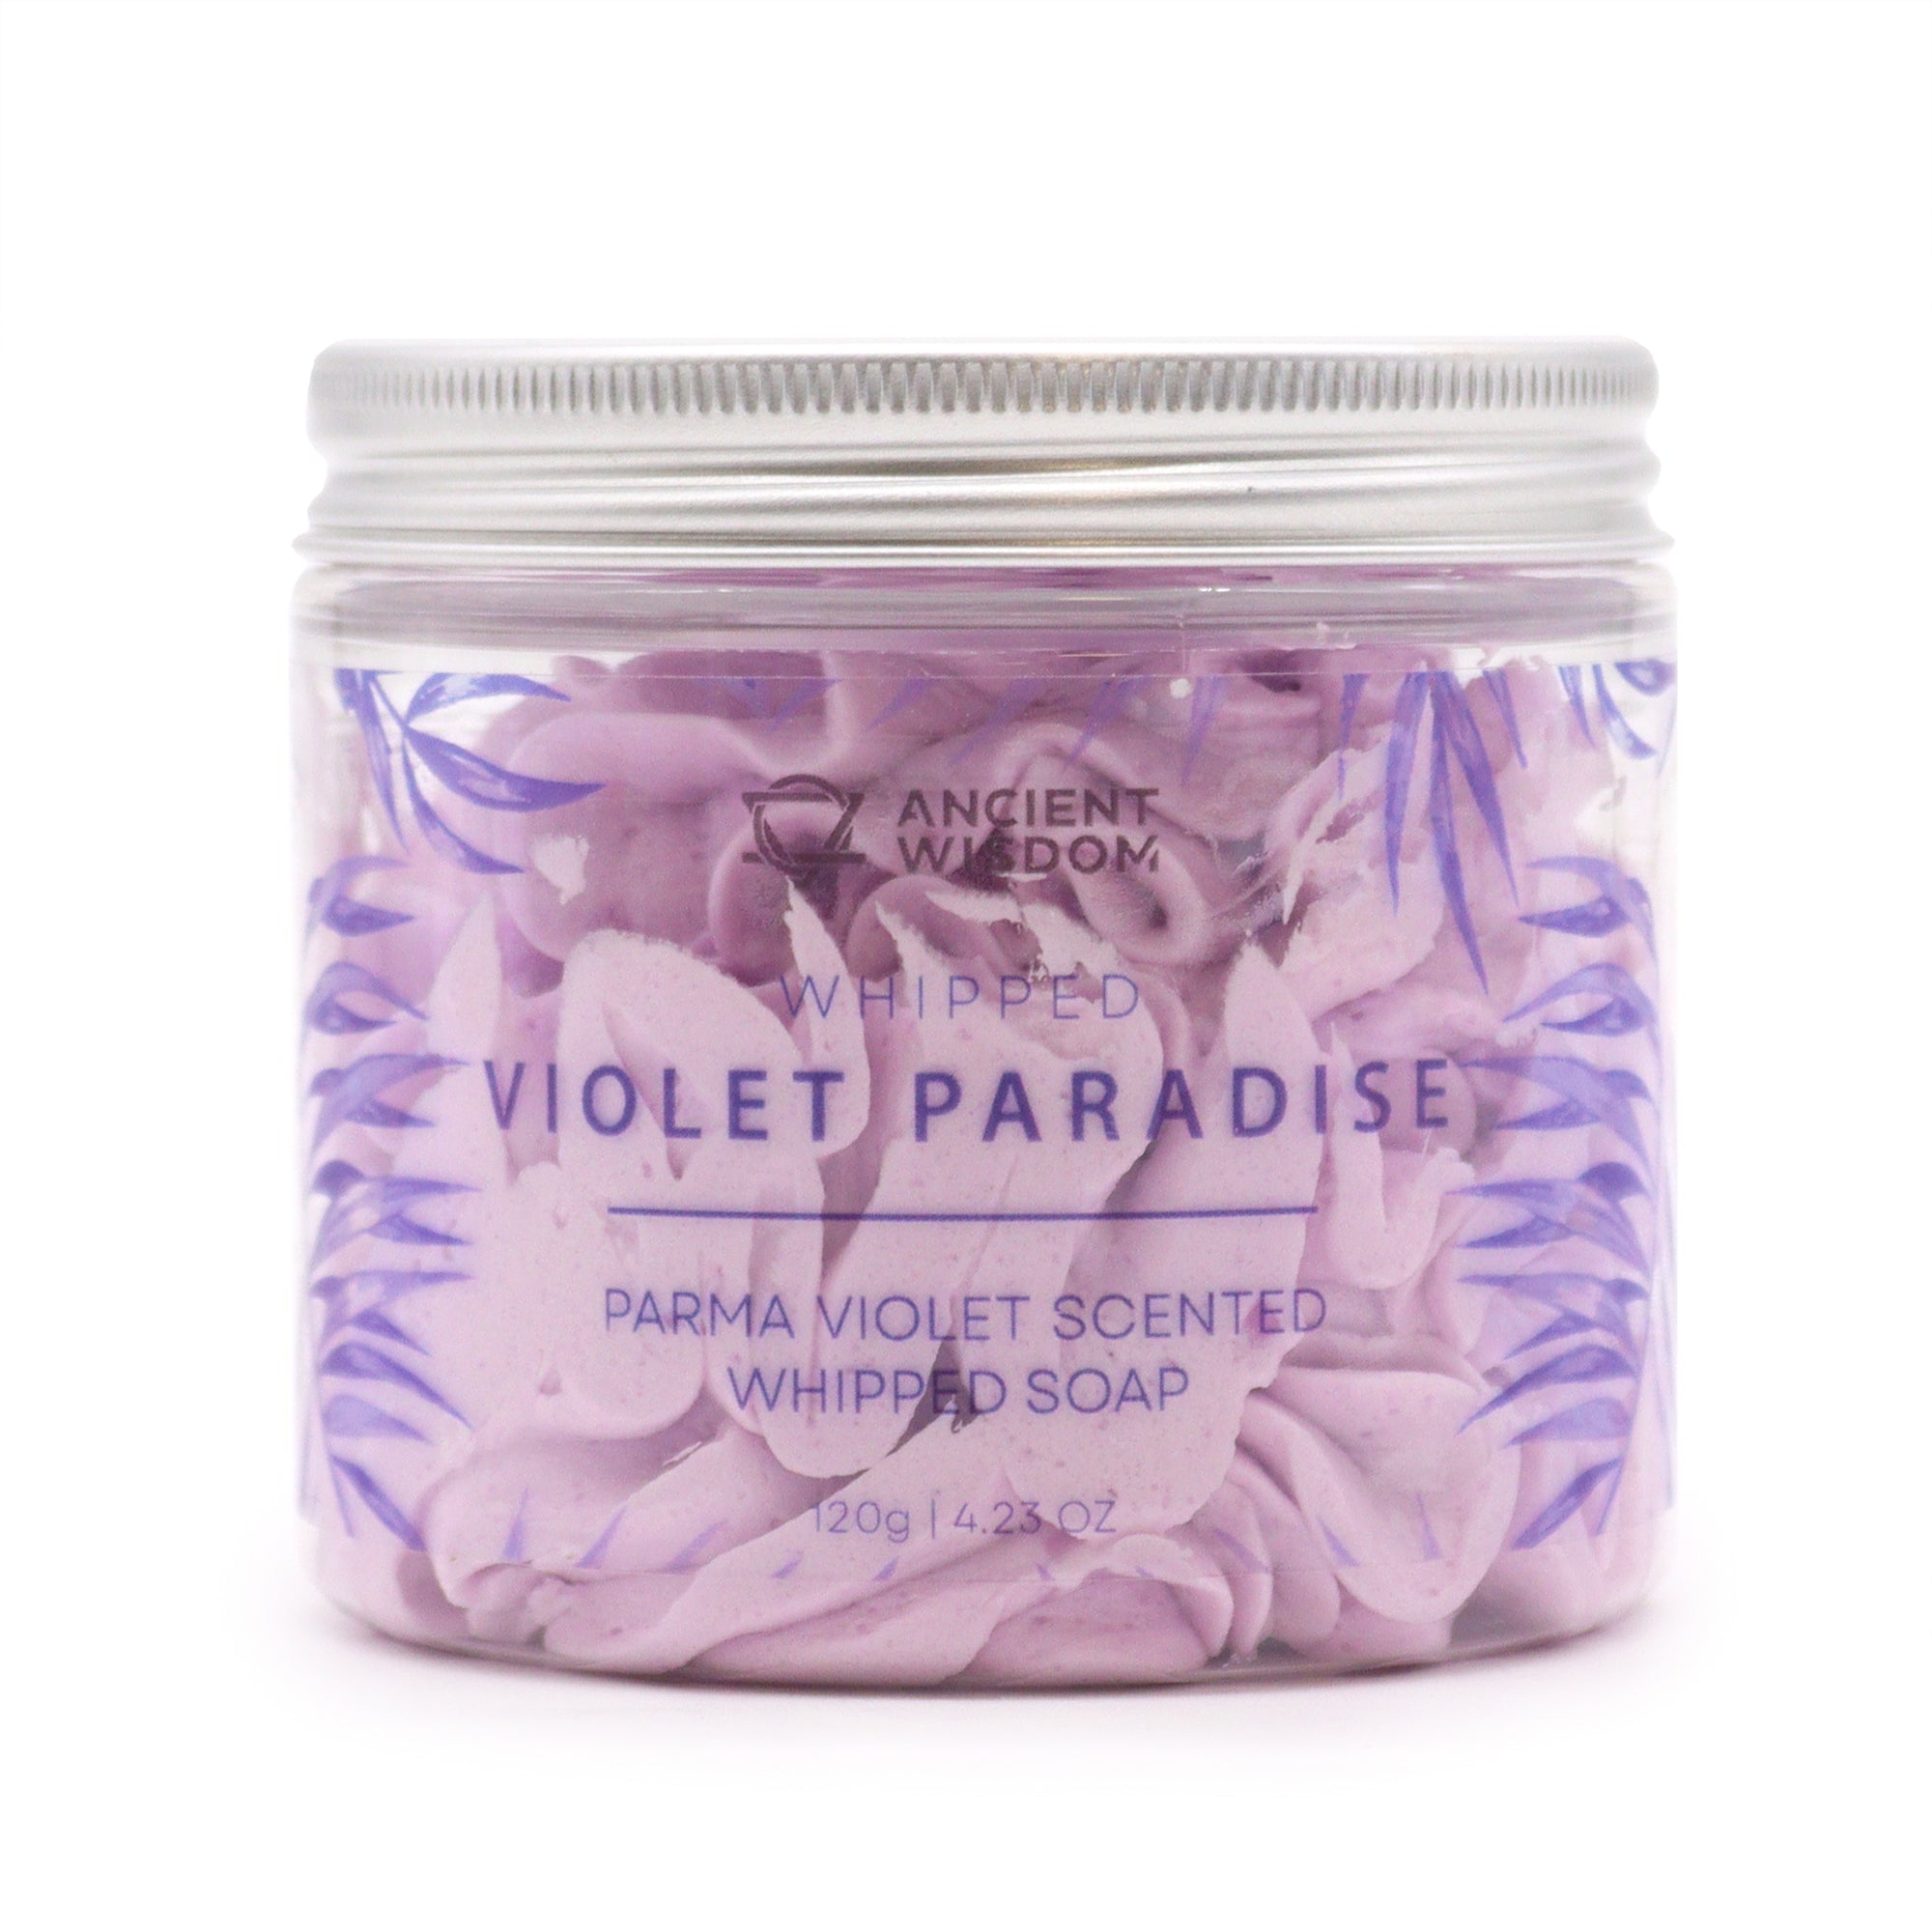 View Parma Violet Whipped Soap 120g information